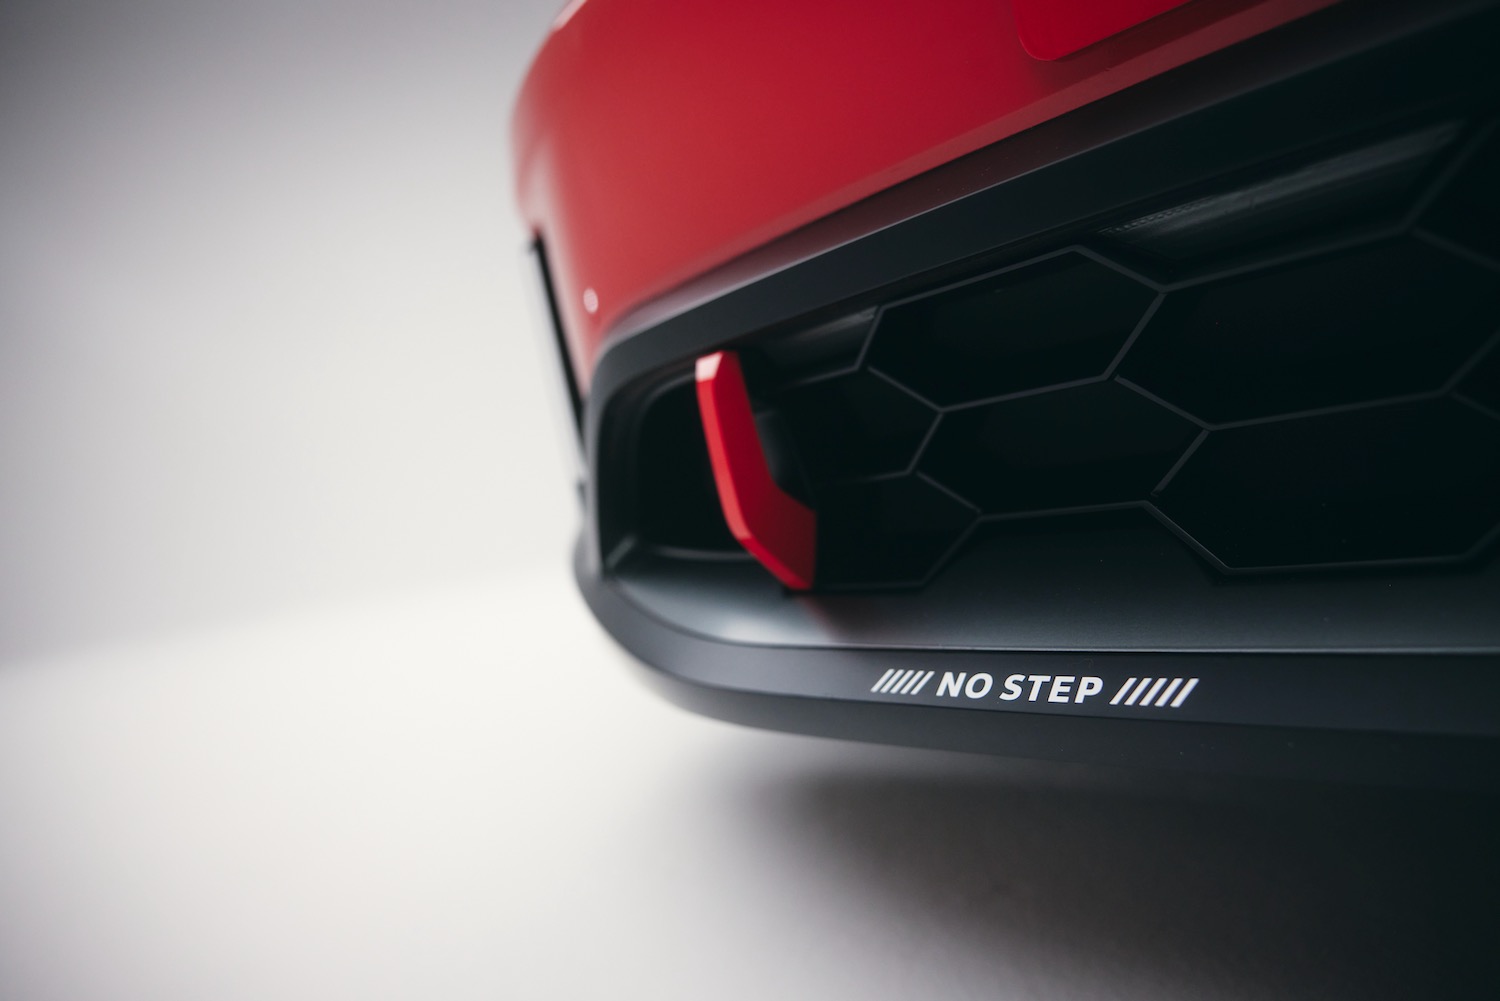 Volkswagen ID.GTI concept front bumper with "No Step" label.